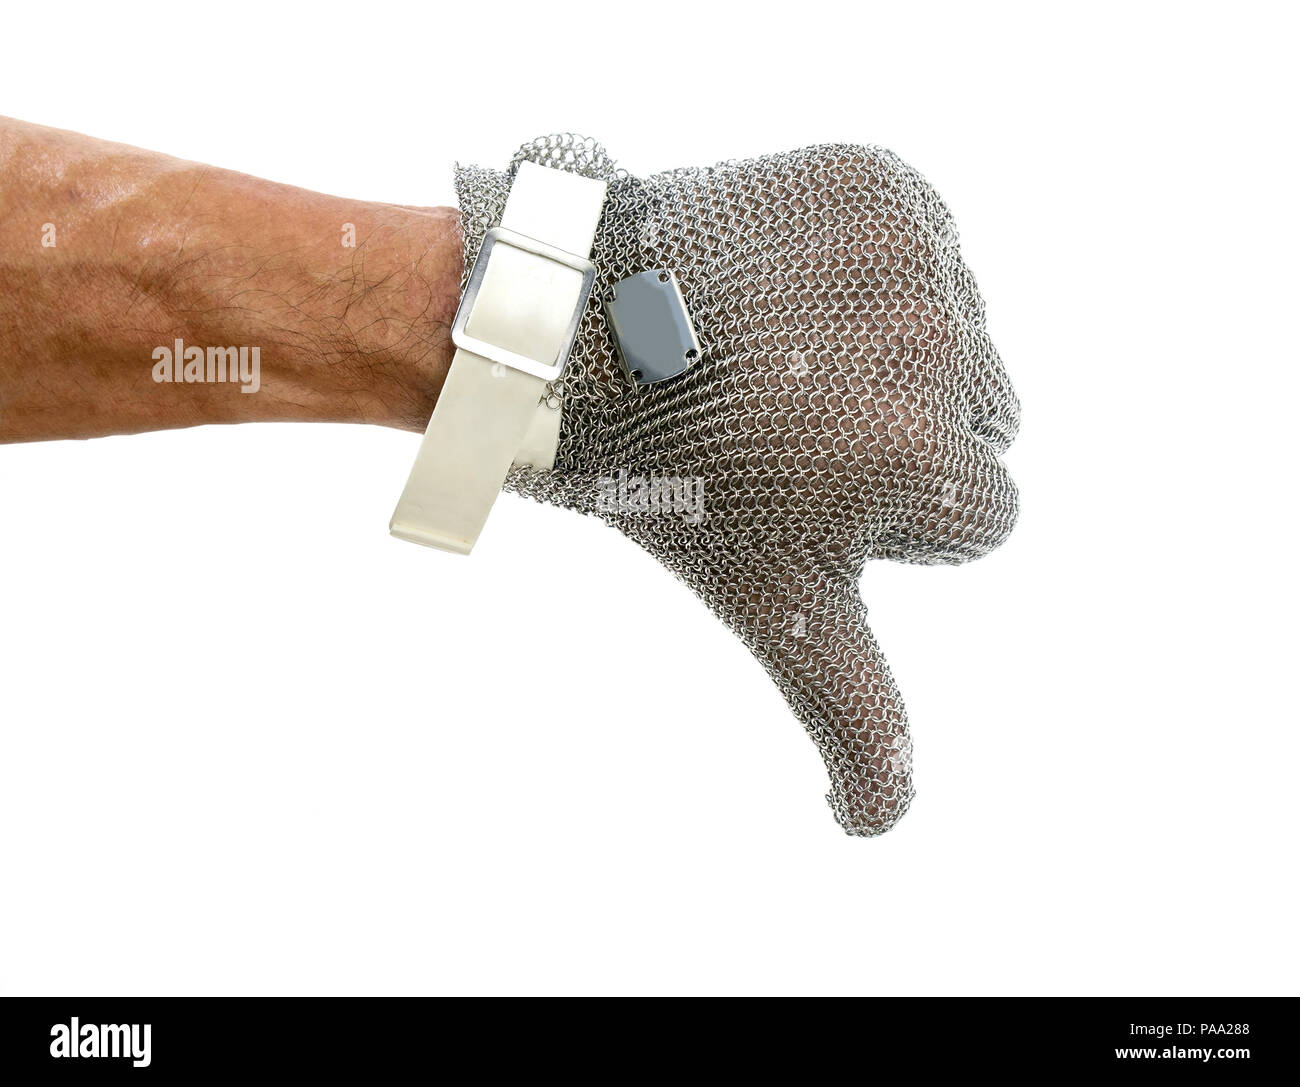 Hand with iron mesh glove on white background. Protection devices for industrial applications. Stock Photo